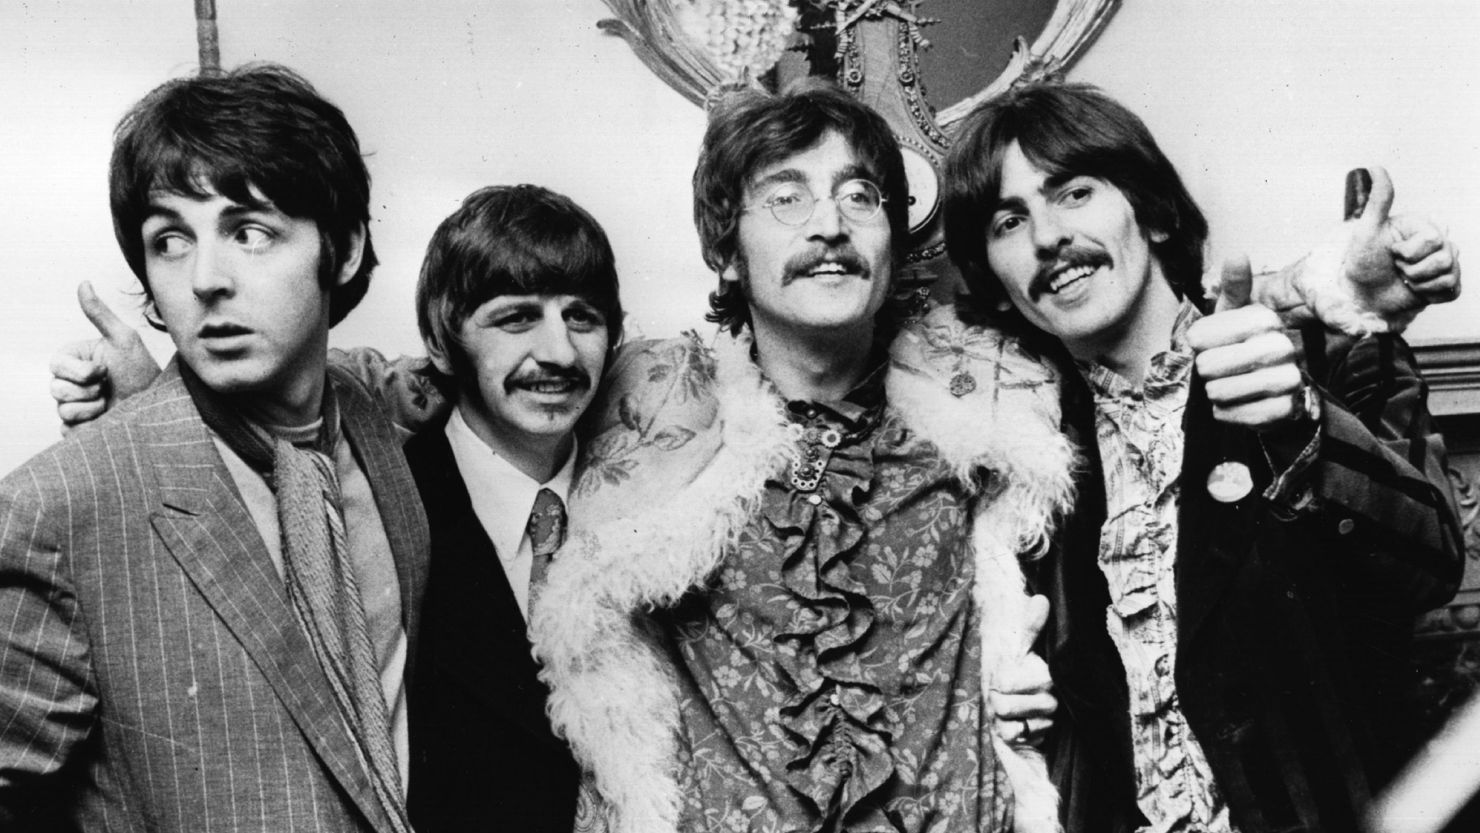 19th May 1967:  The Beatles celebrate the completion of their new album, 'Sgt Pepper's Lonely Hearts Club Band', at a press conference held at the west London home of their manager Brian Epstein. The LP is released on June 1st.  (Photo by John Pratt/Keystone/Getty Images)